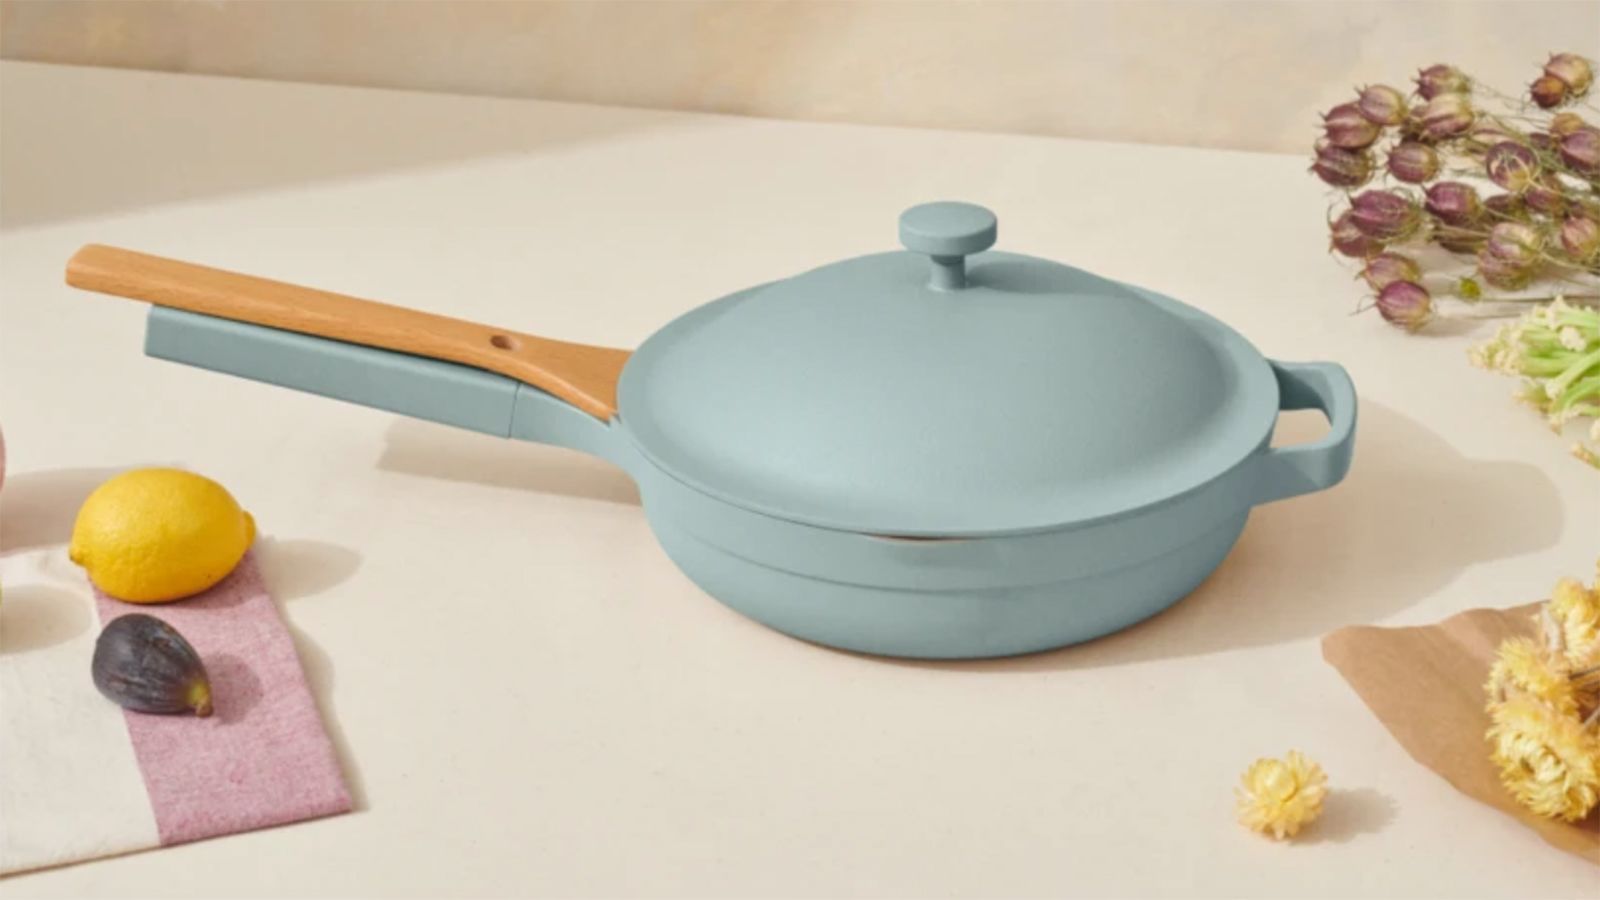 Our Place Launches Always Pan in New Heat Color